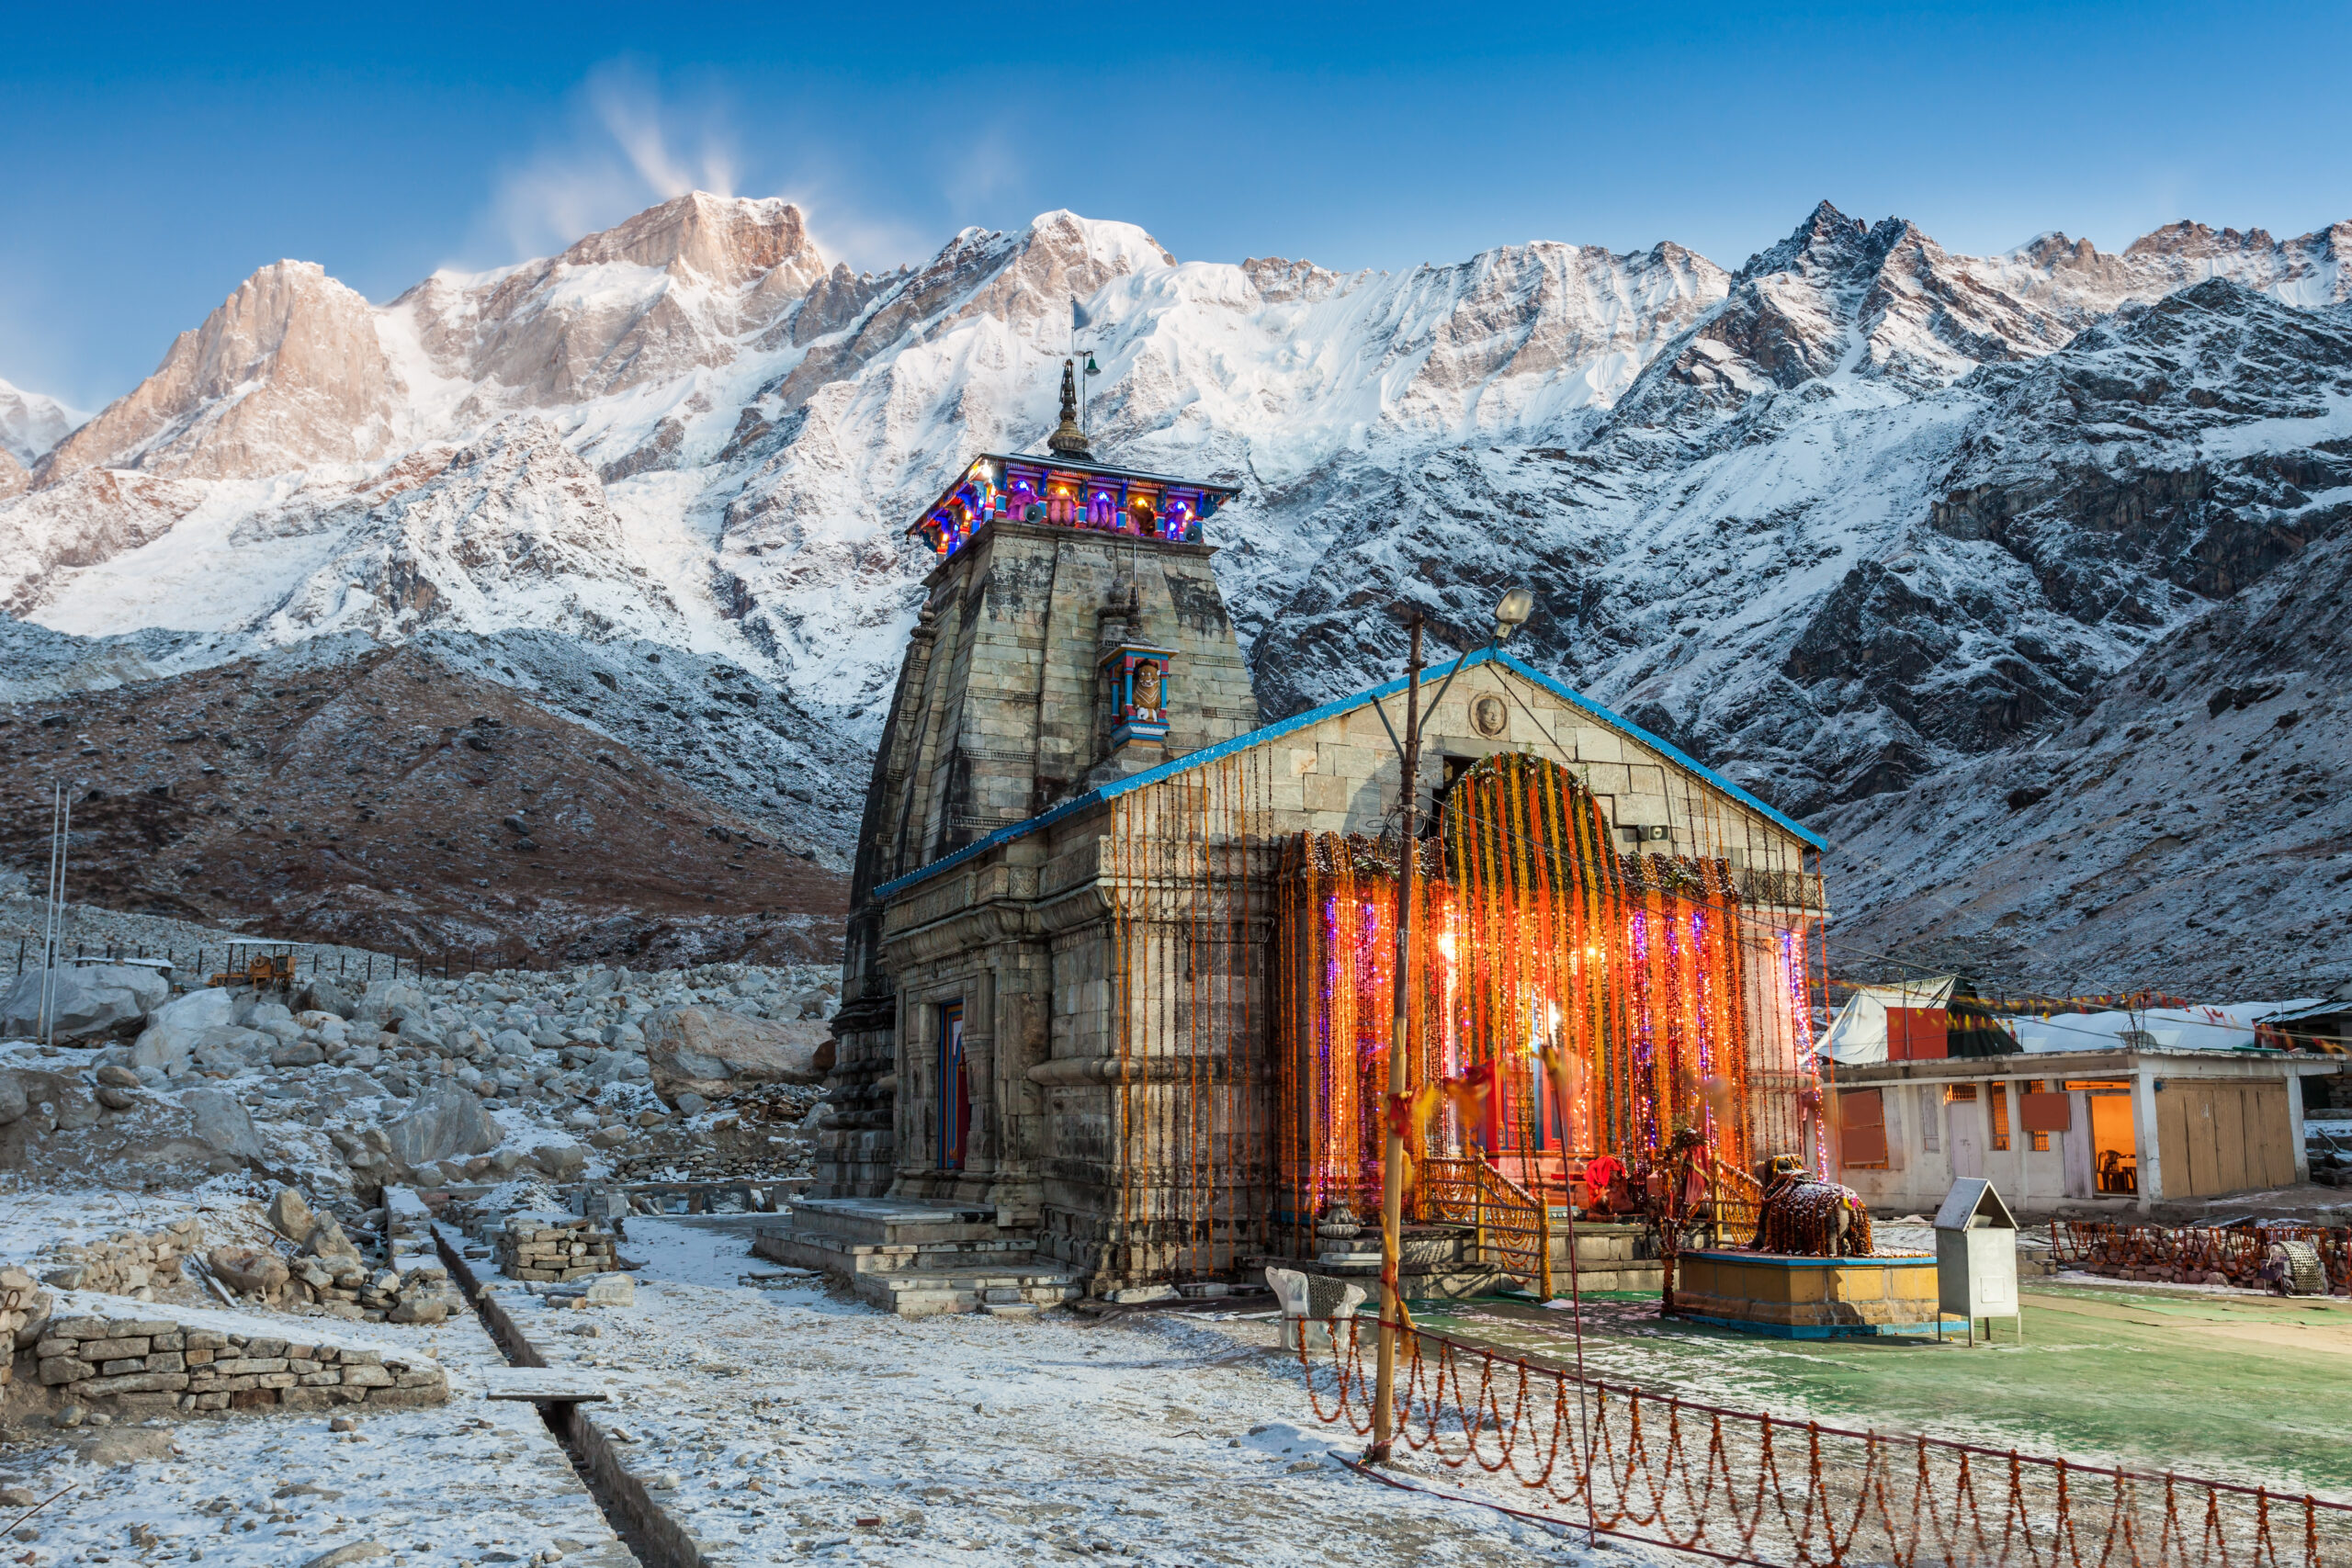 Tips to make your Kedarnath trip safer and easier